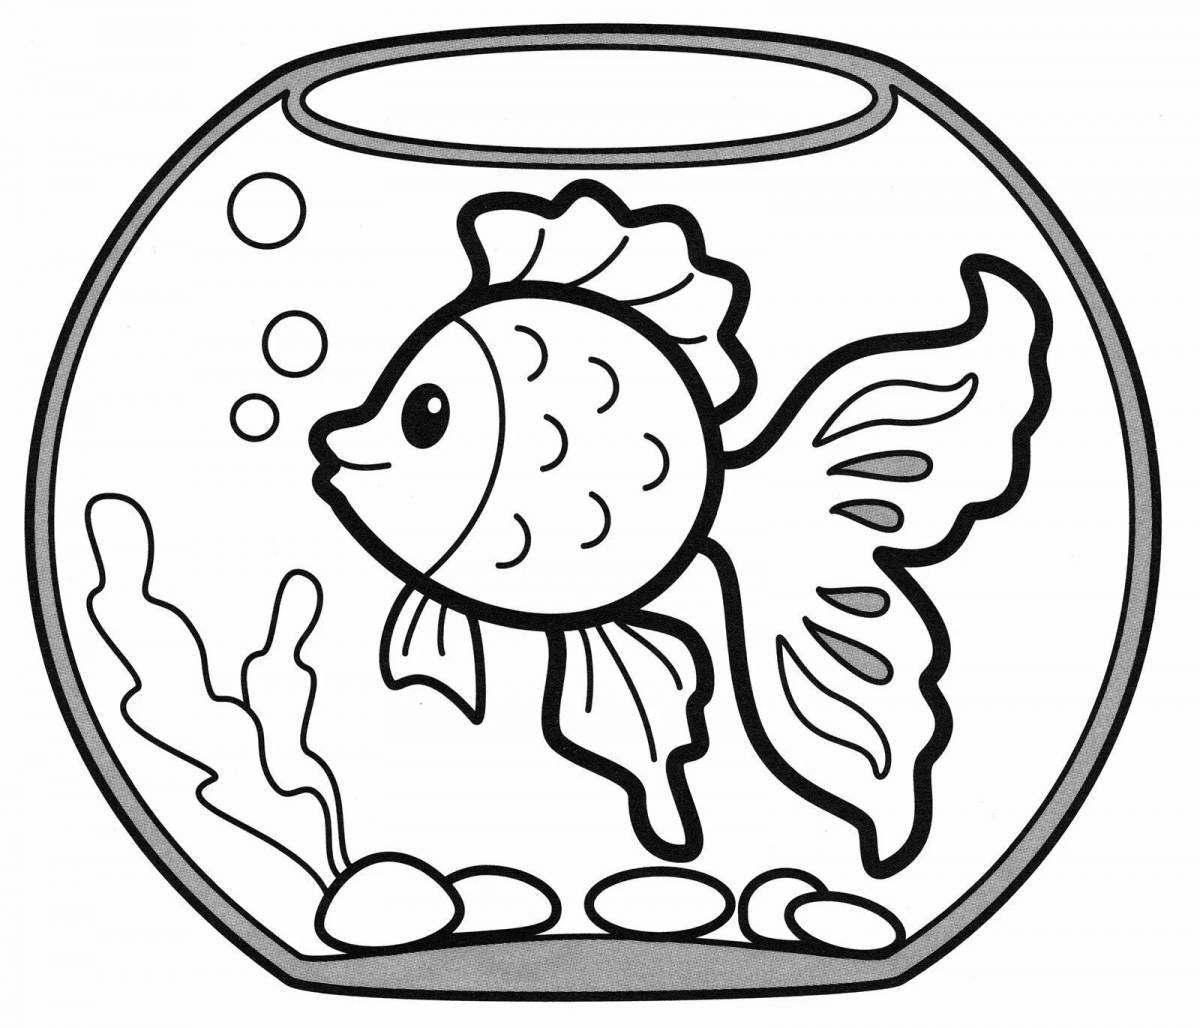 Adorable aquarium fish coloring book for 5-6 year olds